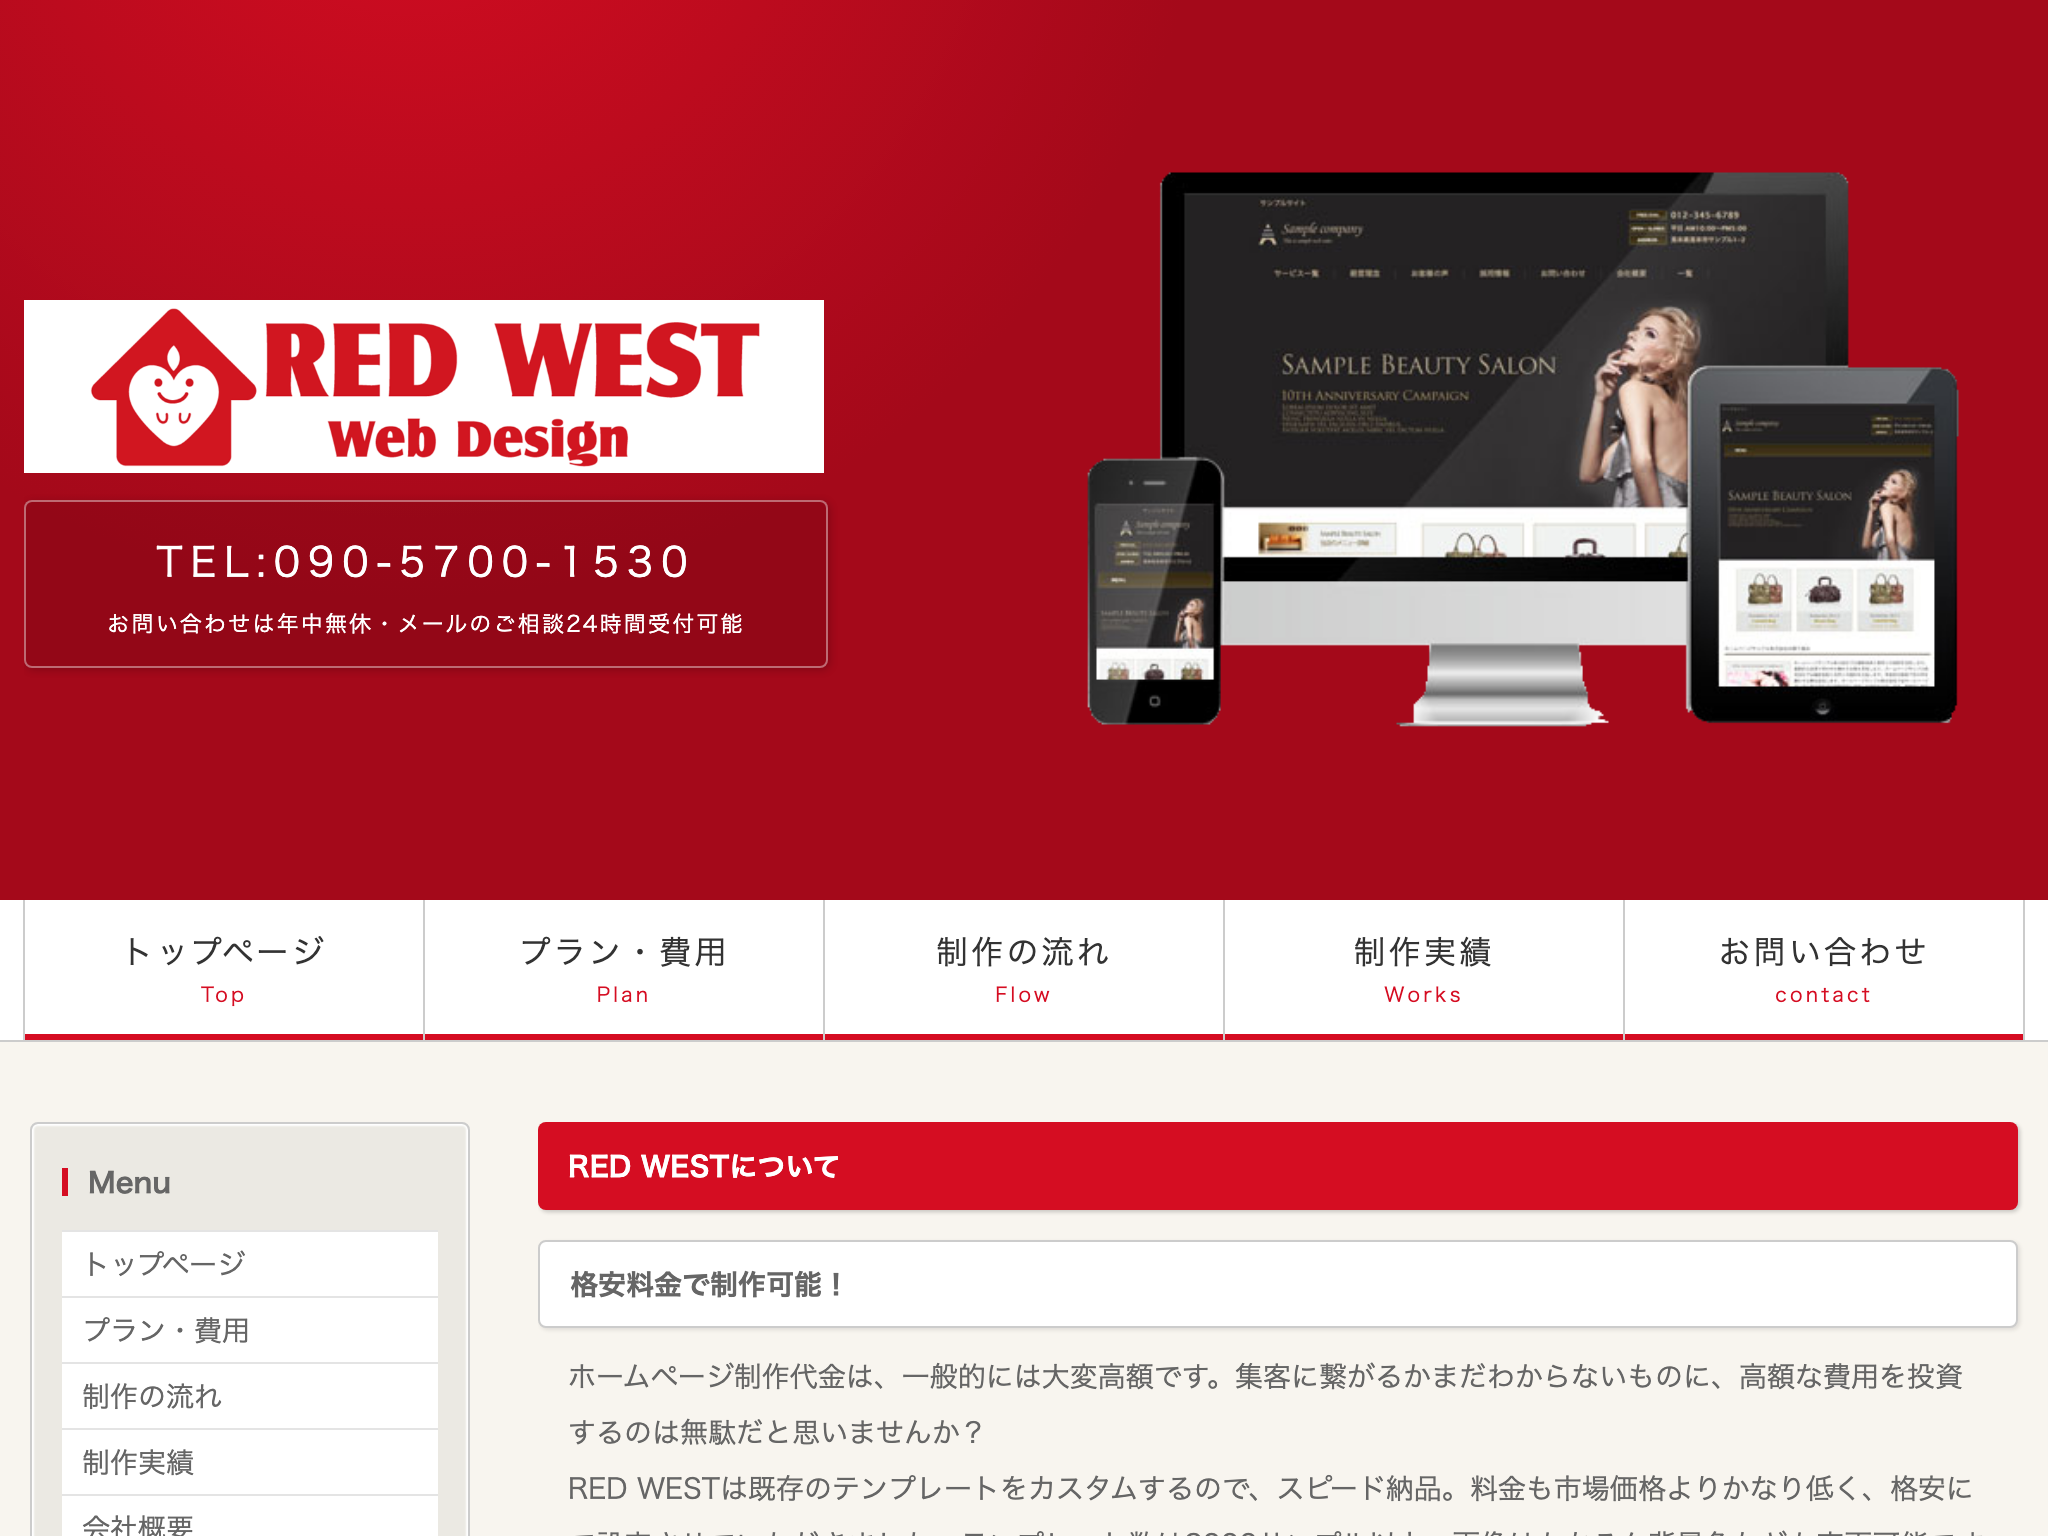 RED WEST